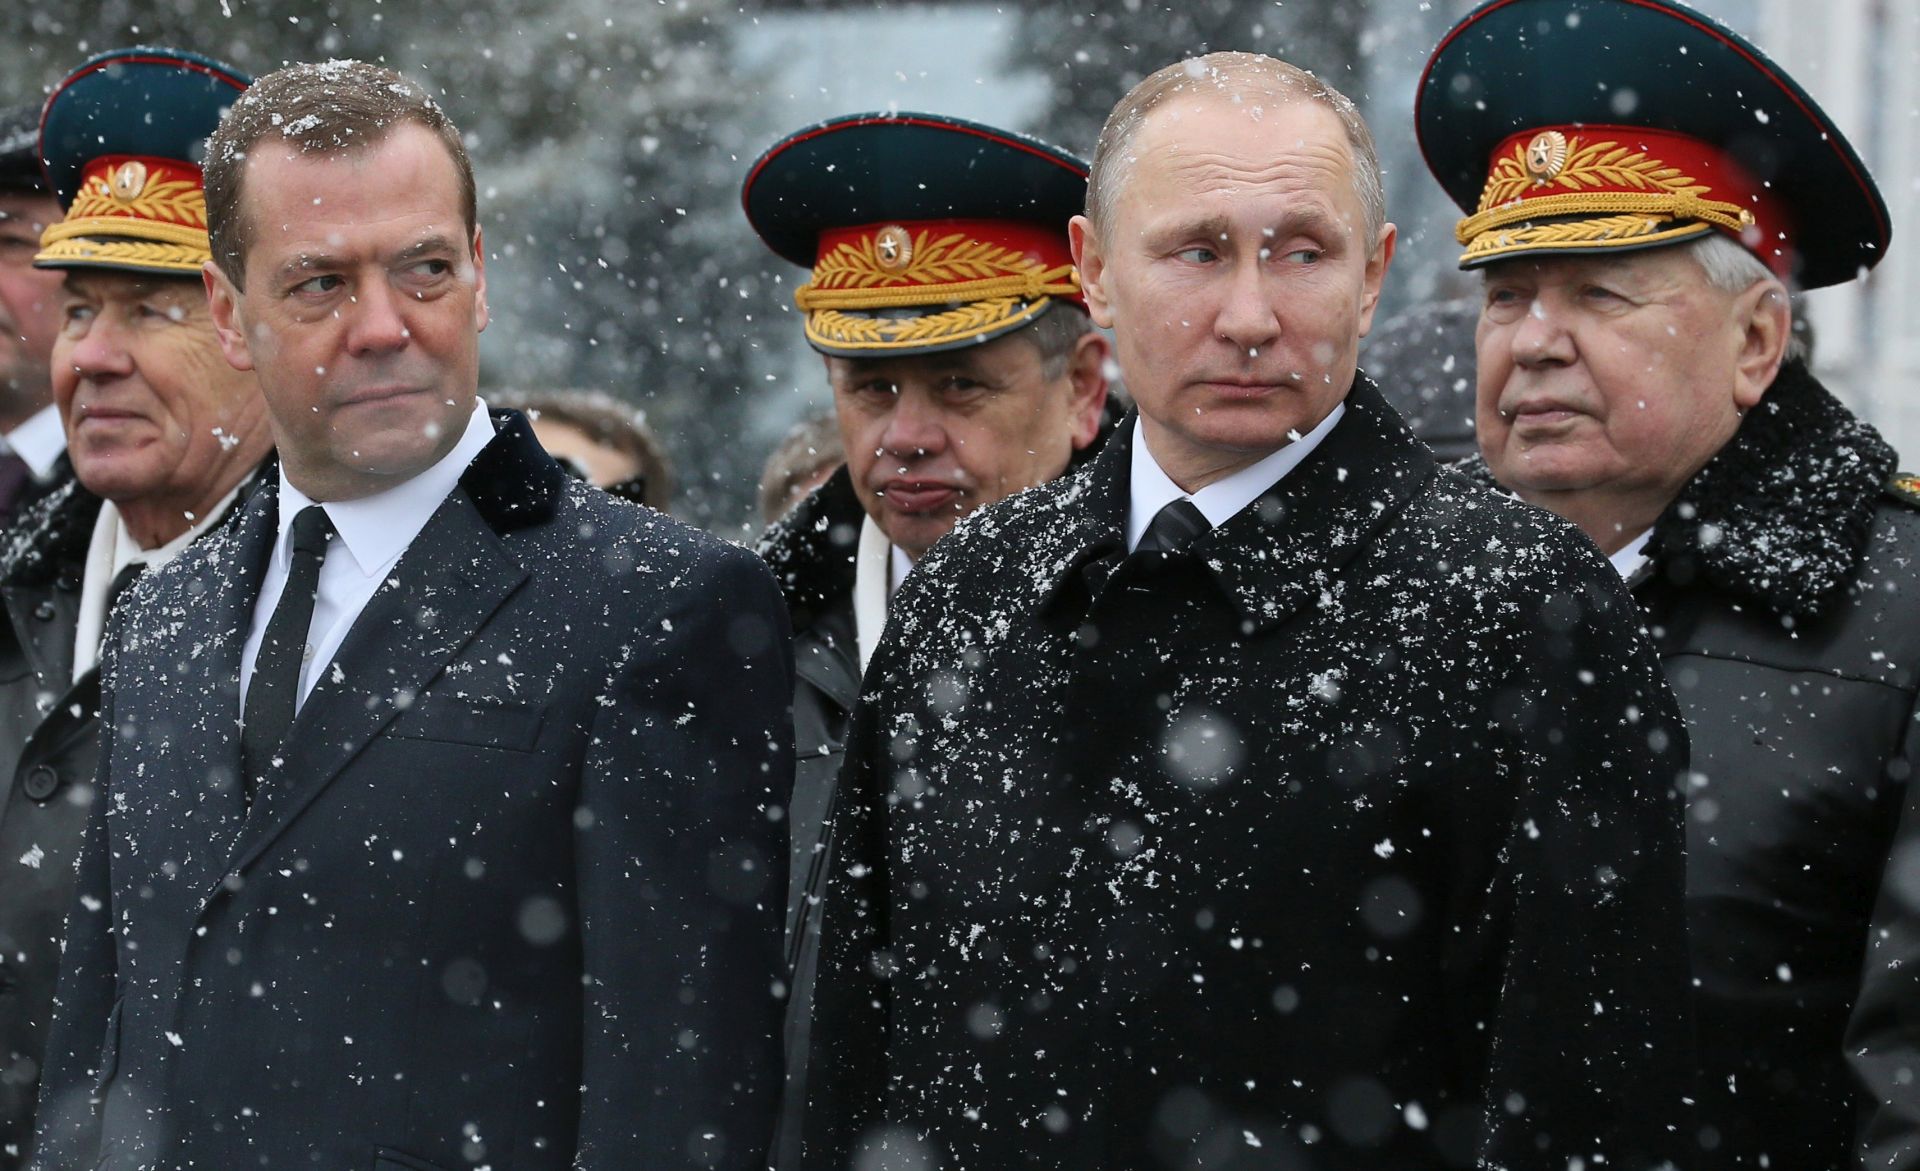 epa05809923 Russian President Vladimir Putin (front R) and Russian Prime Minister Dmitry Medvedev (front L) attend a wreath-laying ceremony at the Tomb of the Unknown Soldier by the Kremlin Wall in Moscow, Russia, 23 February 2017. Russia marks the Fatherland Defenders' Day on 23 February.  EPA/EKATERINA SHTUKINA/SPUTNIK/GOVERNMENT PRESS SERVICE POOL / POOL MANDATORY CREDIT